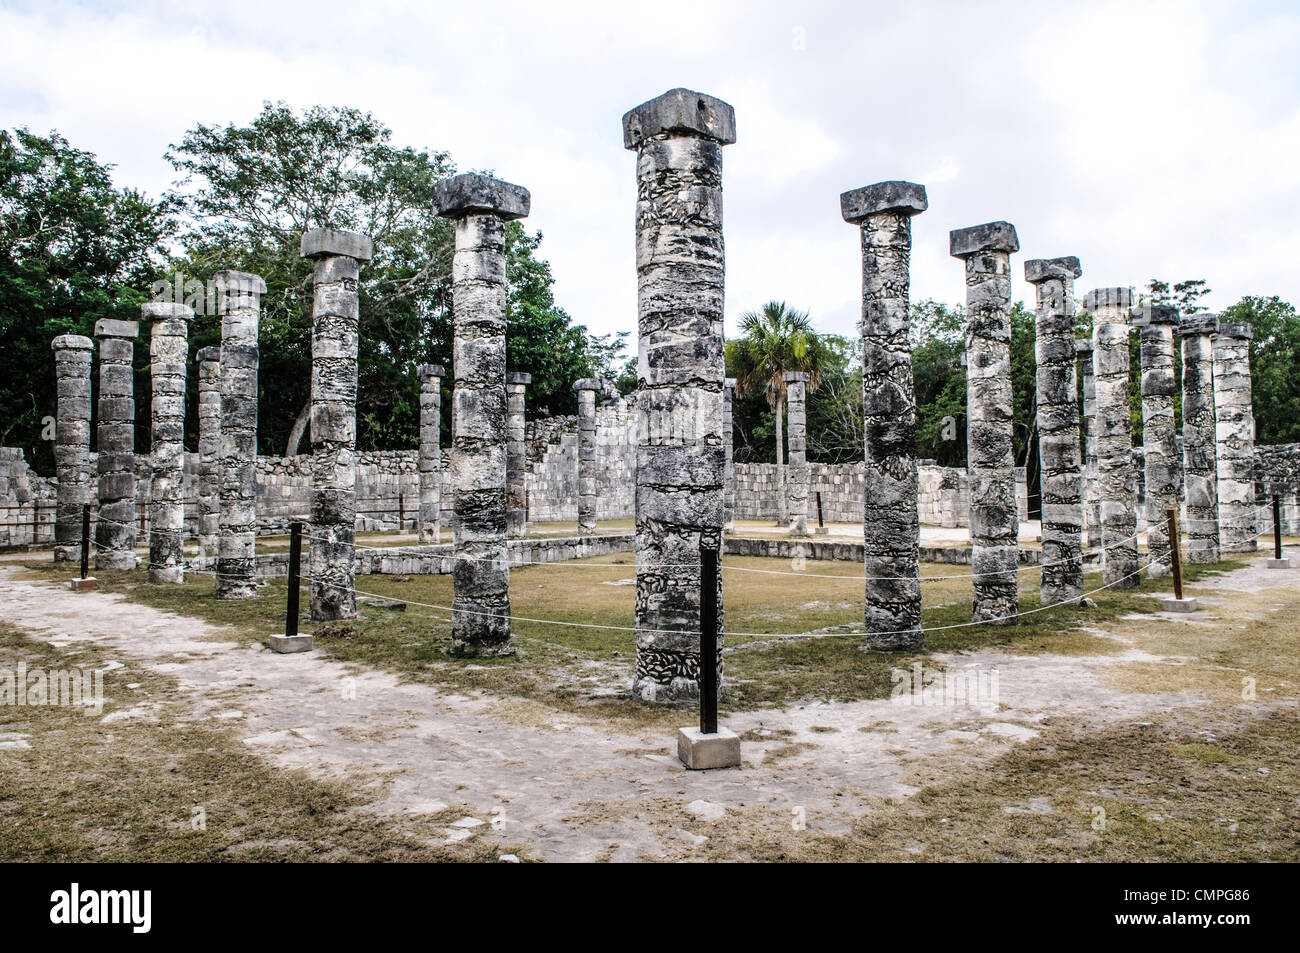 CHICHEN ITZA, Mexico - Rows of stone pillars line the Plaza of the Thousand Columns at Chichen Itza Mayan ruins archeological zone in the heart of Mexico's Yucatan Peninsula. Stock Photo